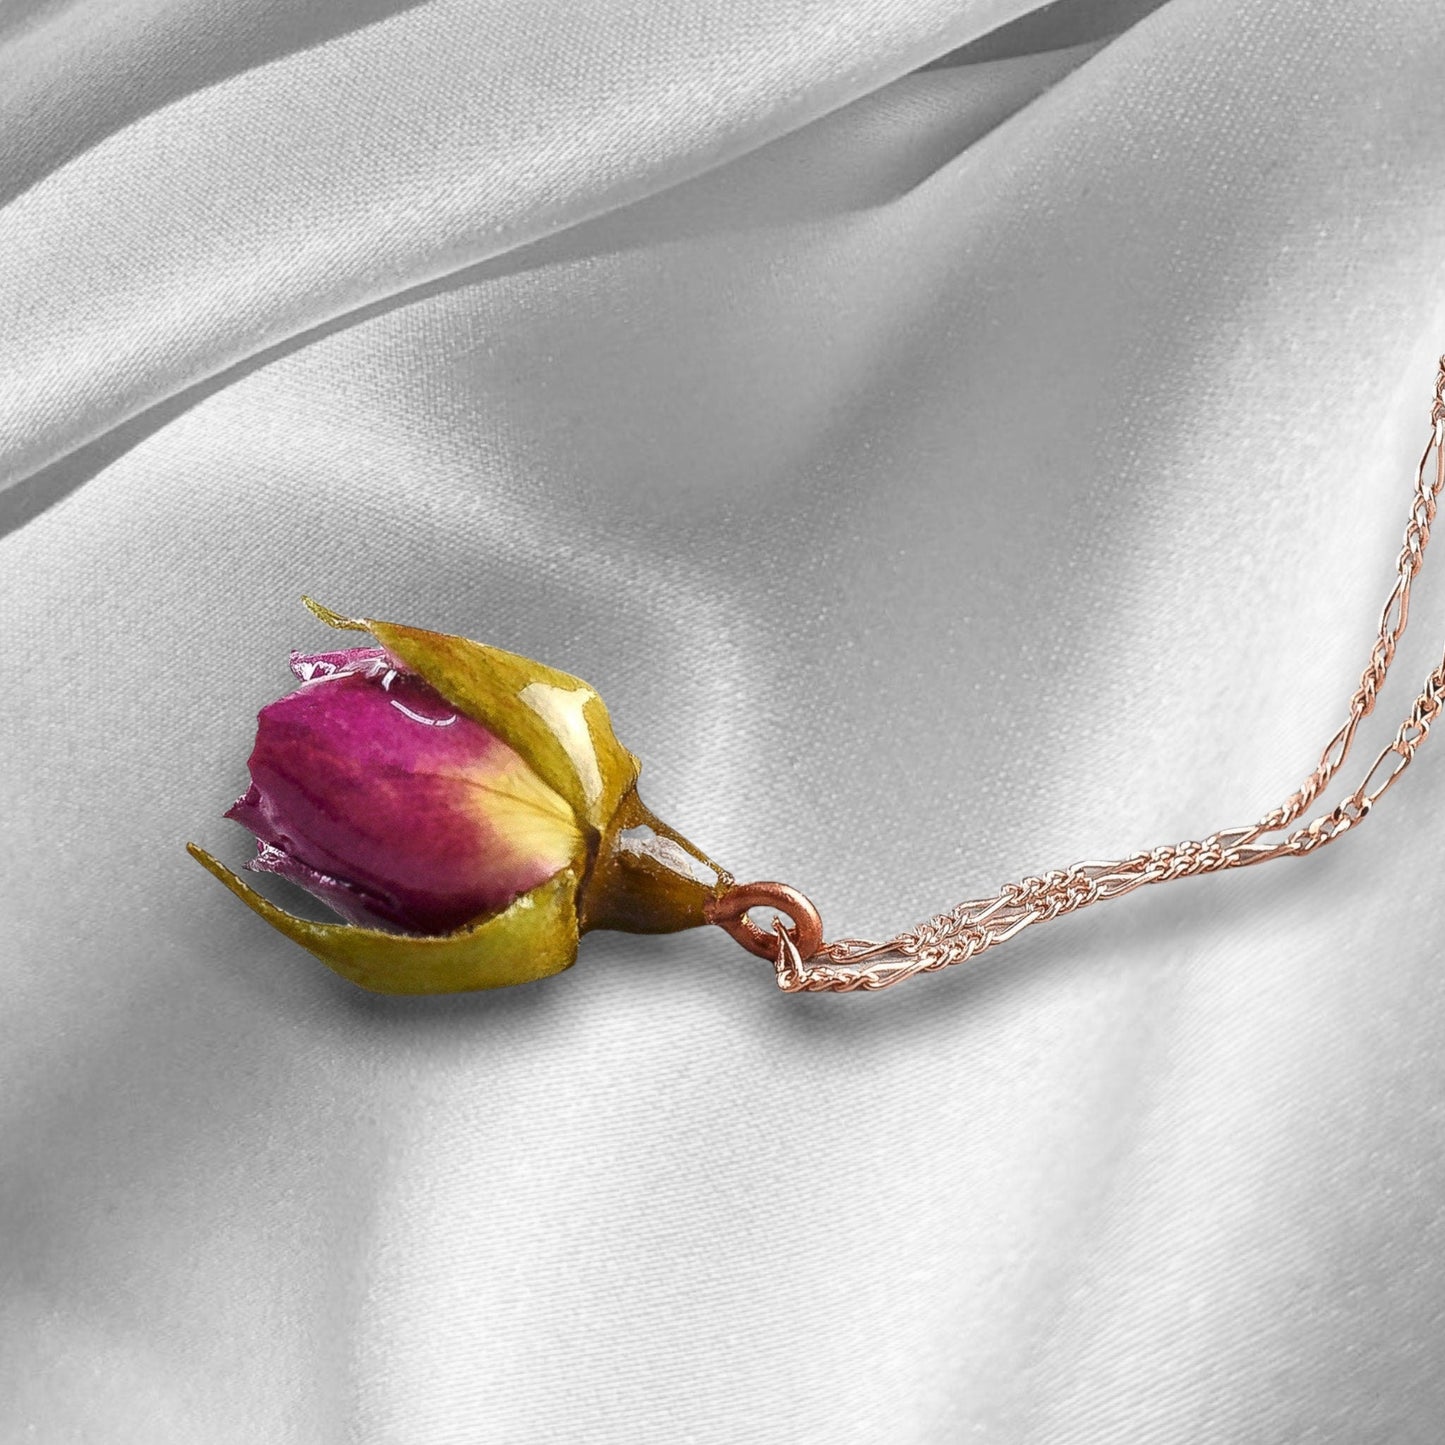 Real Rose Chain - Romantic Jewelry from 925 Sterling Rosegold Gold Plated - Nature Jewelry - K925-50